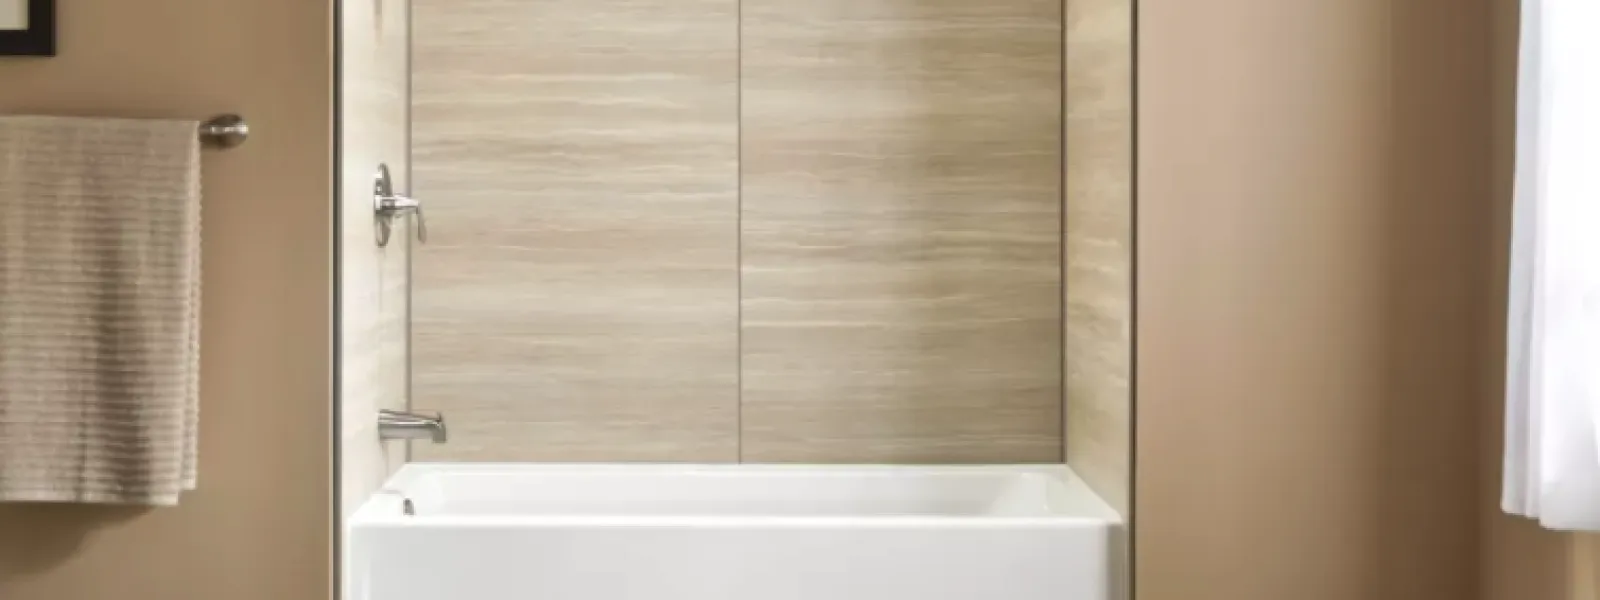 Why To Consider a Bath-Shower Combo